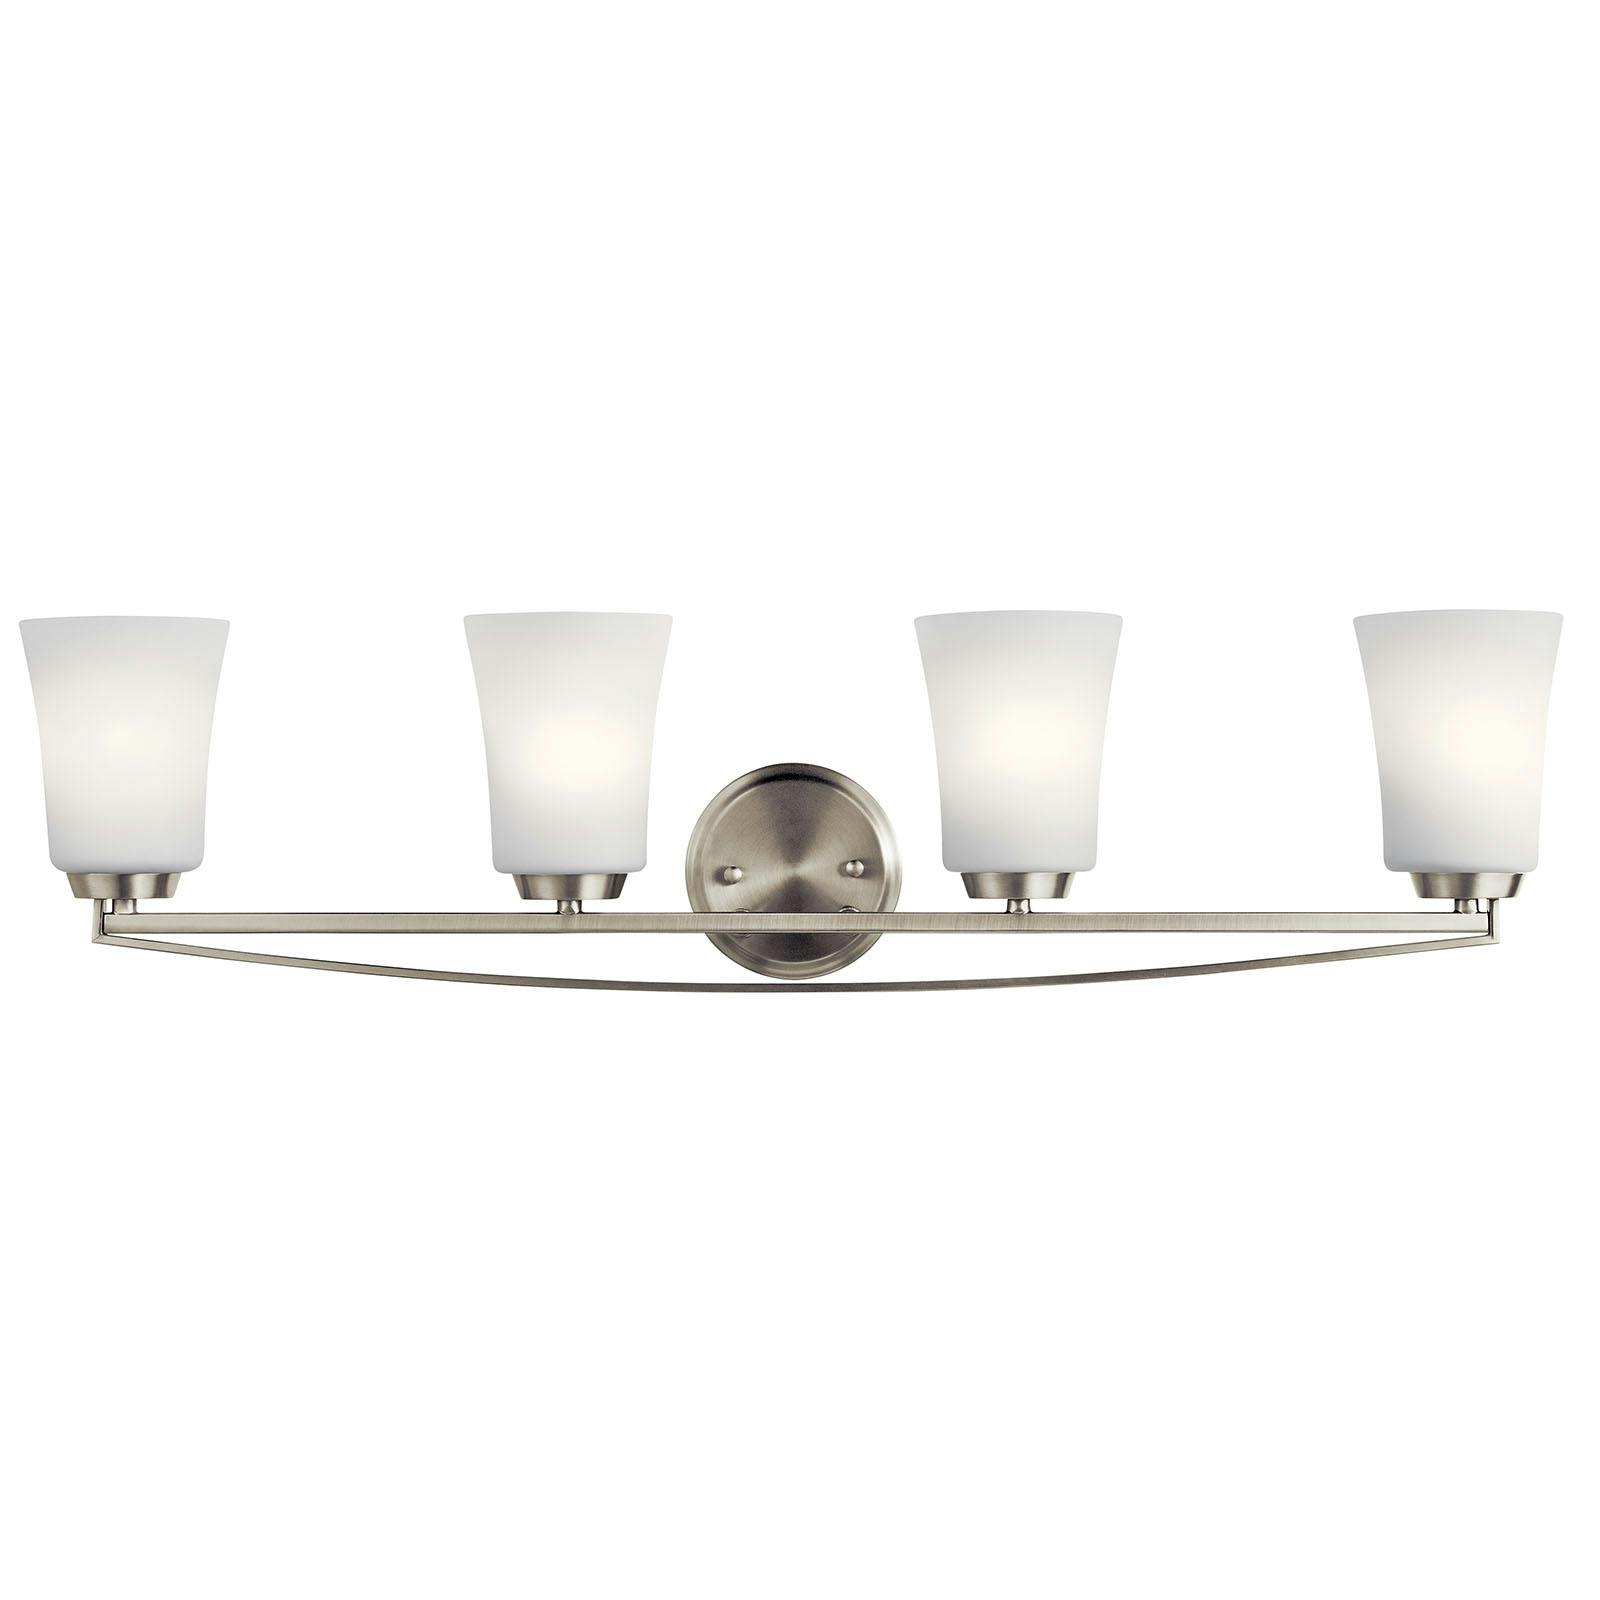 The Tao 4 Light Vanity Light Brushed Nickel facing up on a white background